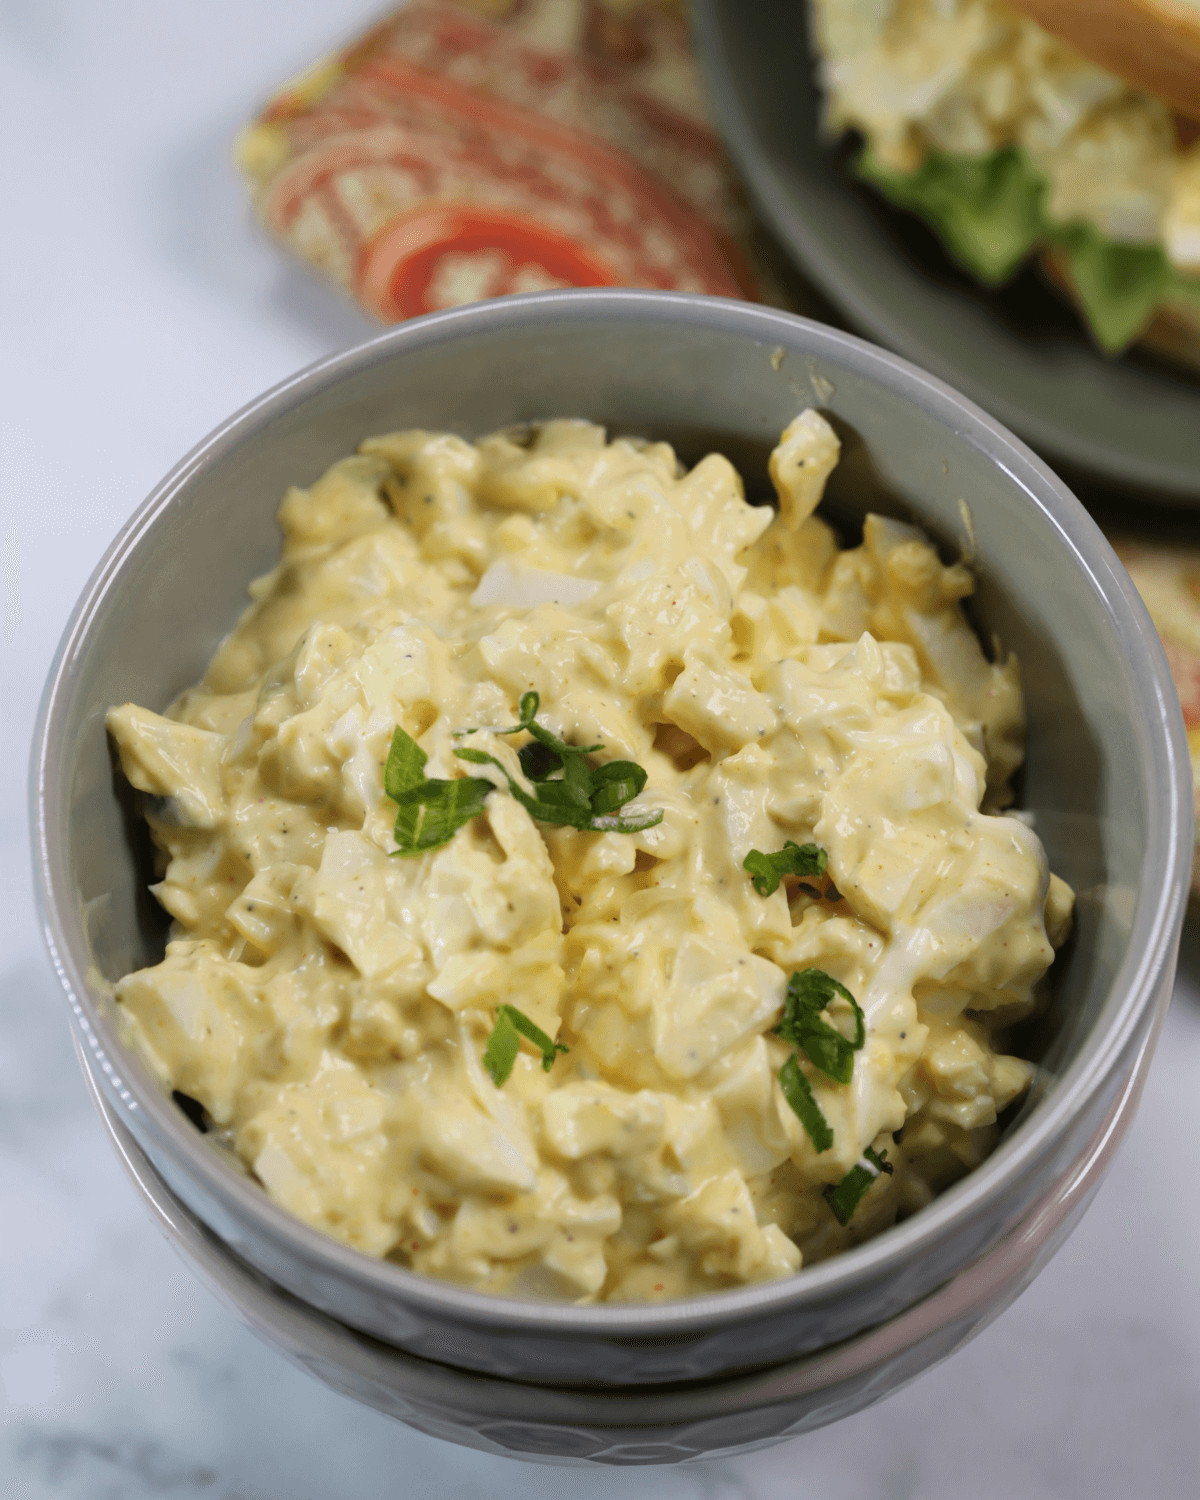 A close up on the southern egg salad.